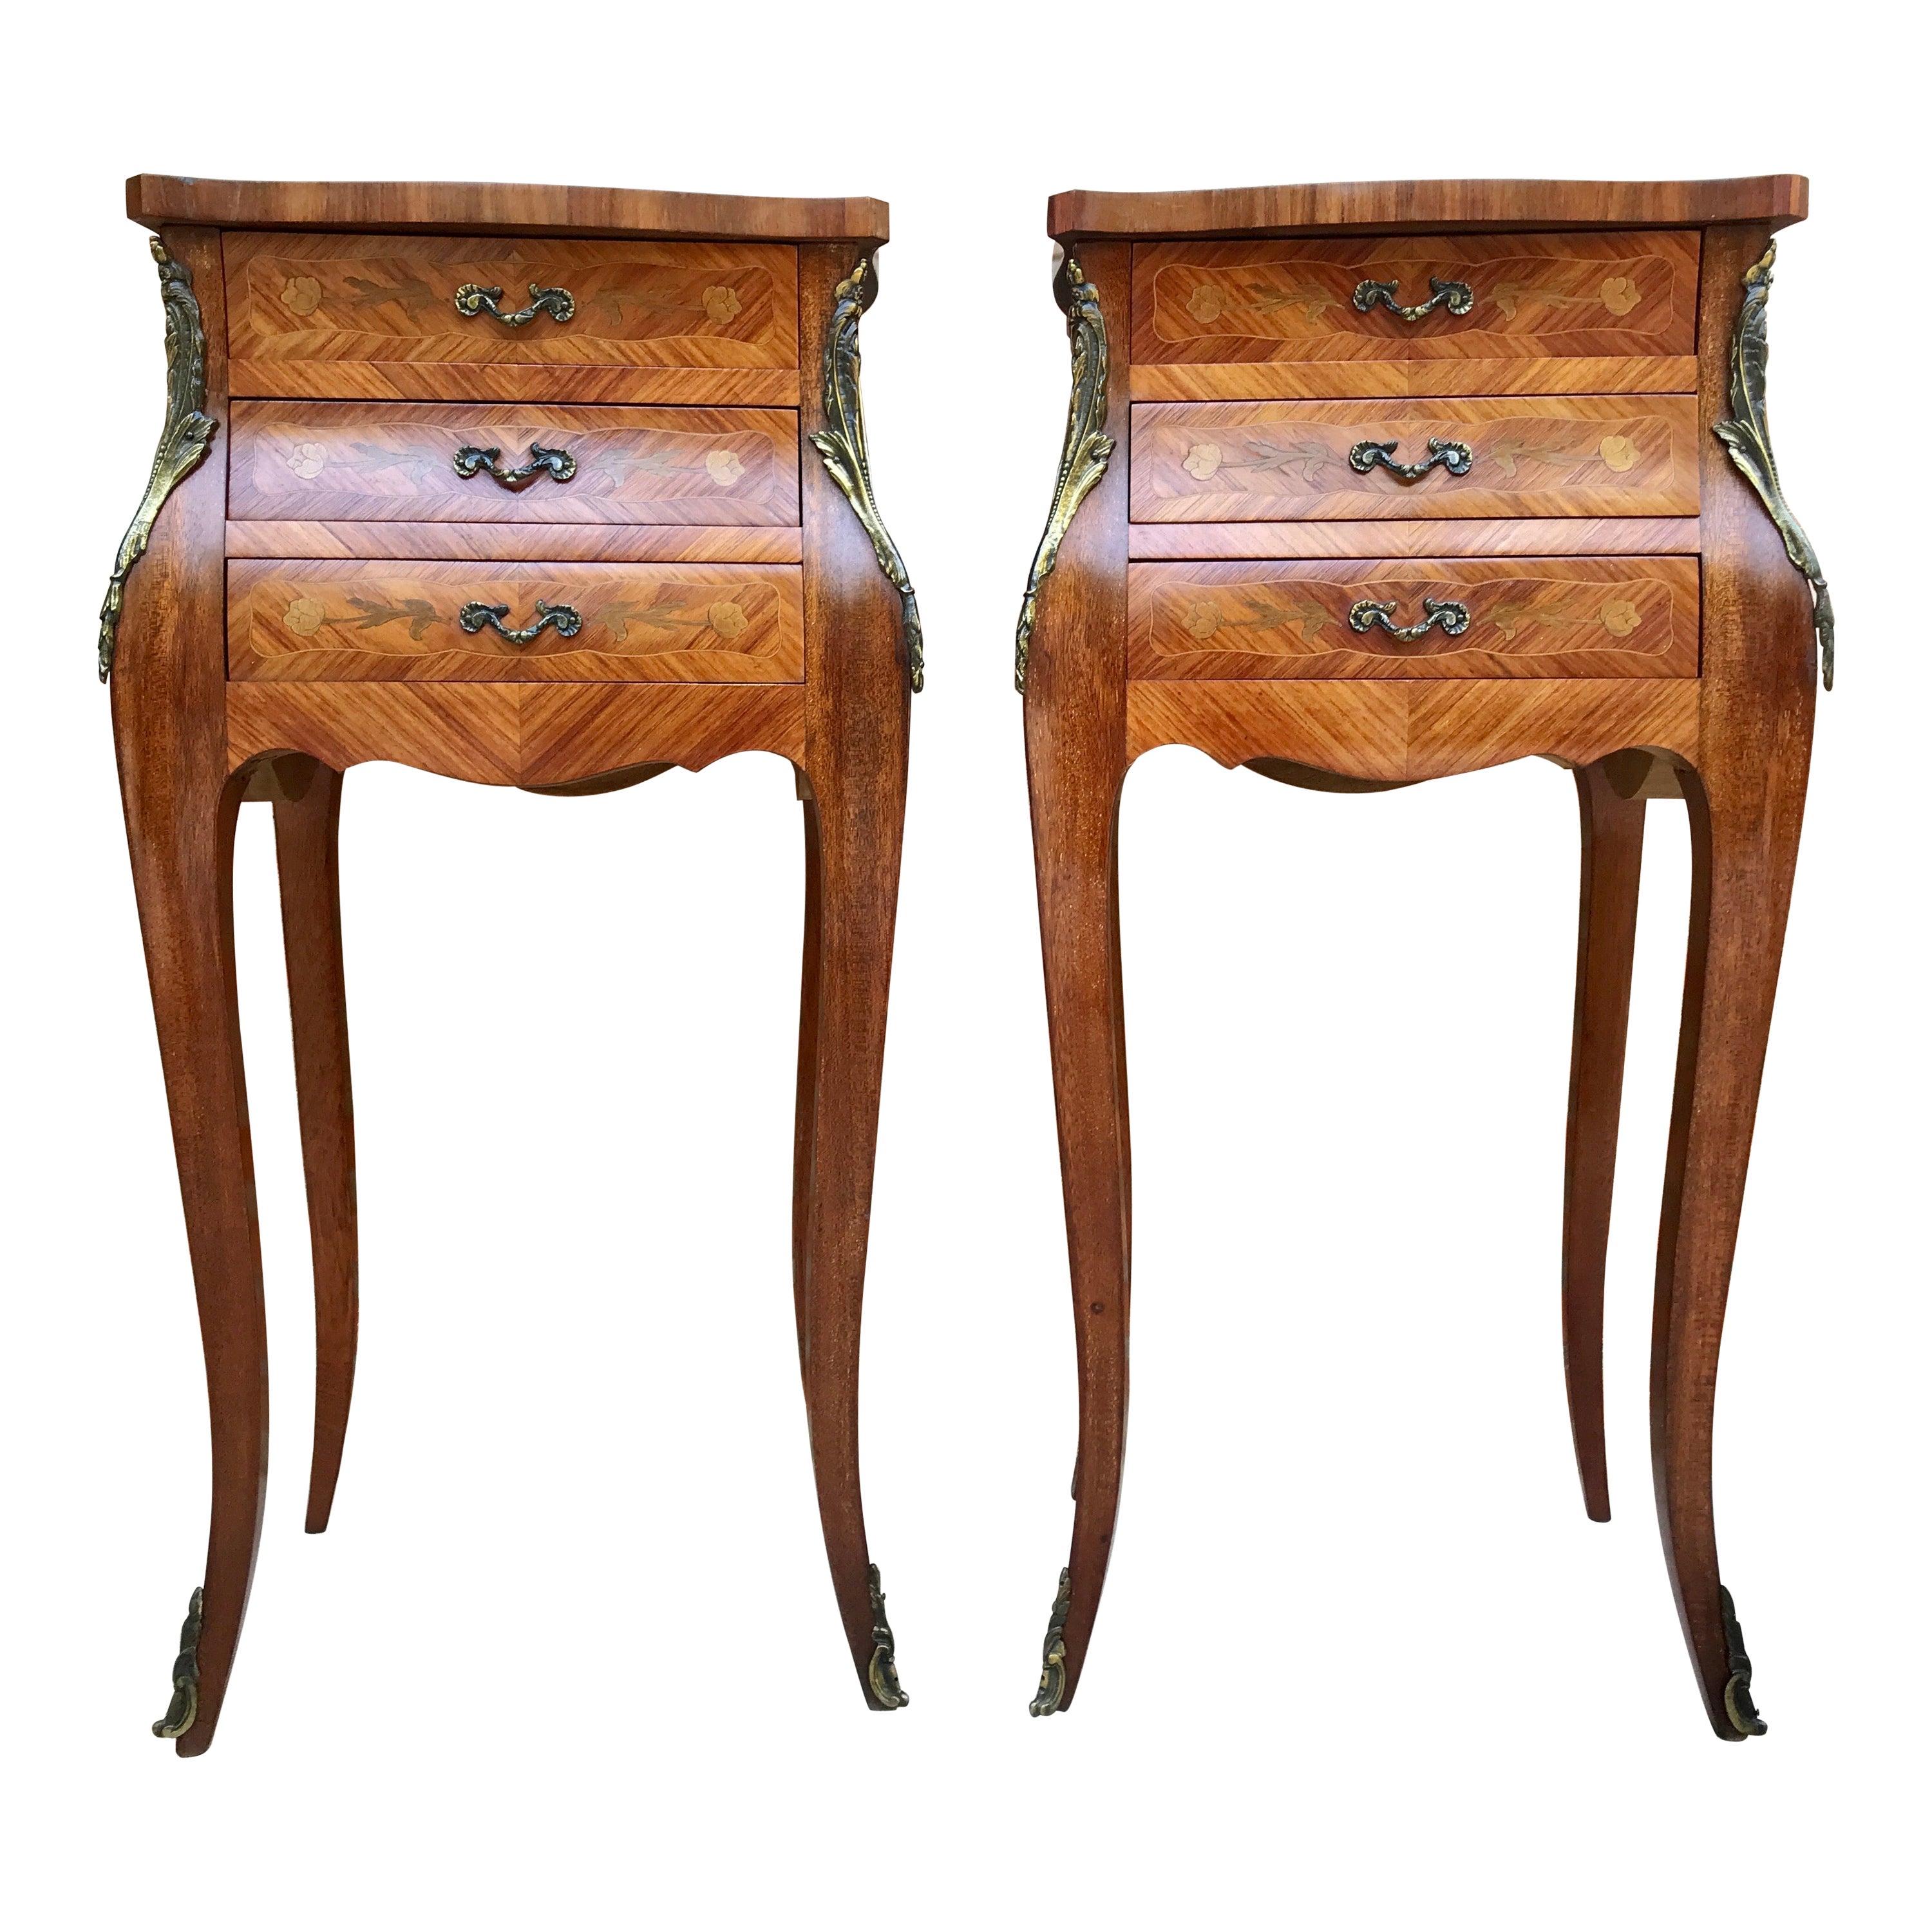 French Classic Louis Vx Style Marquetry Nightstands with Three Drawers, 1920s, S For Sale